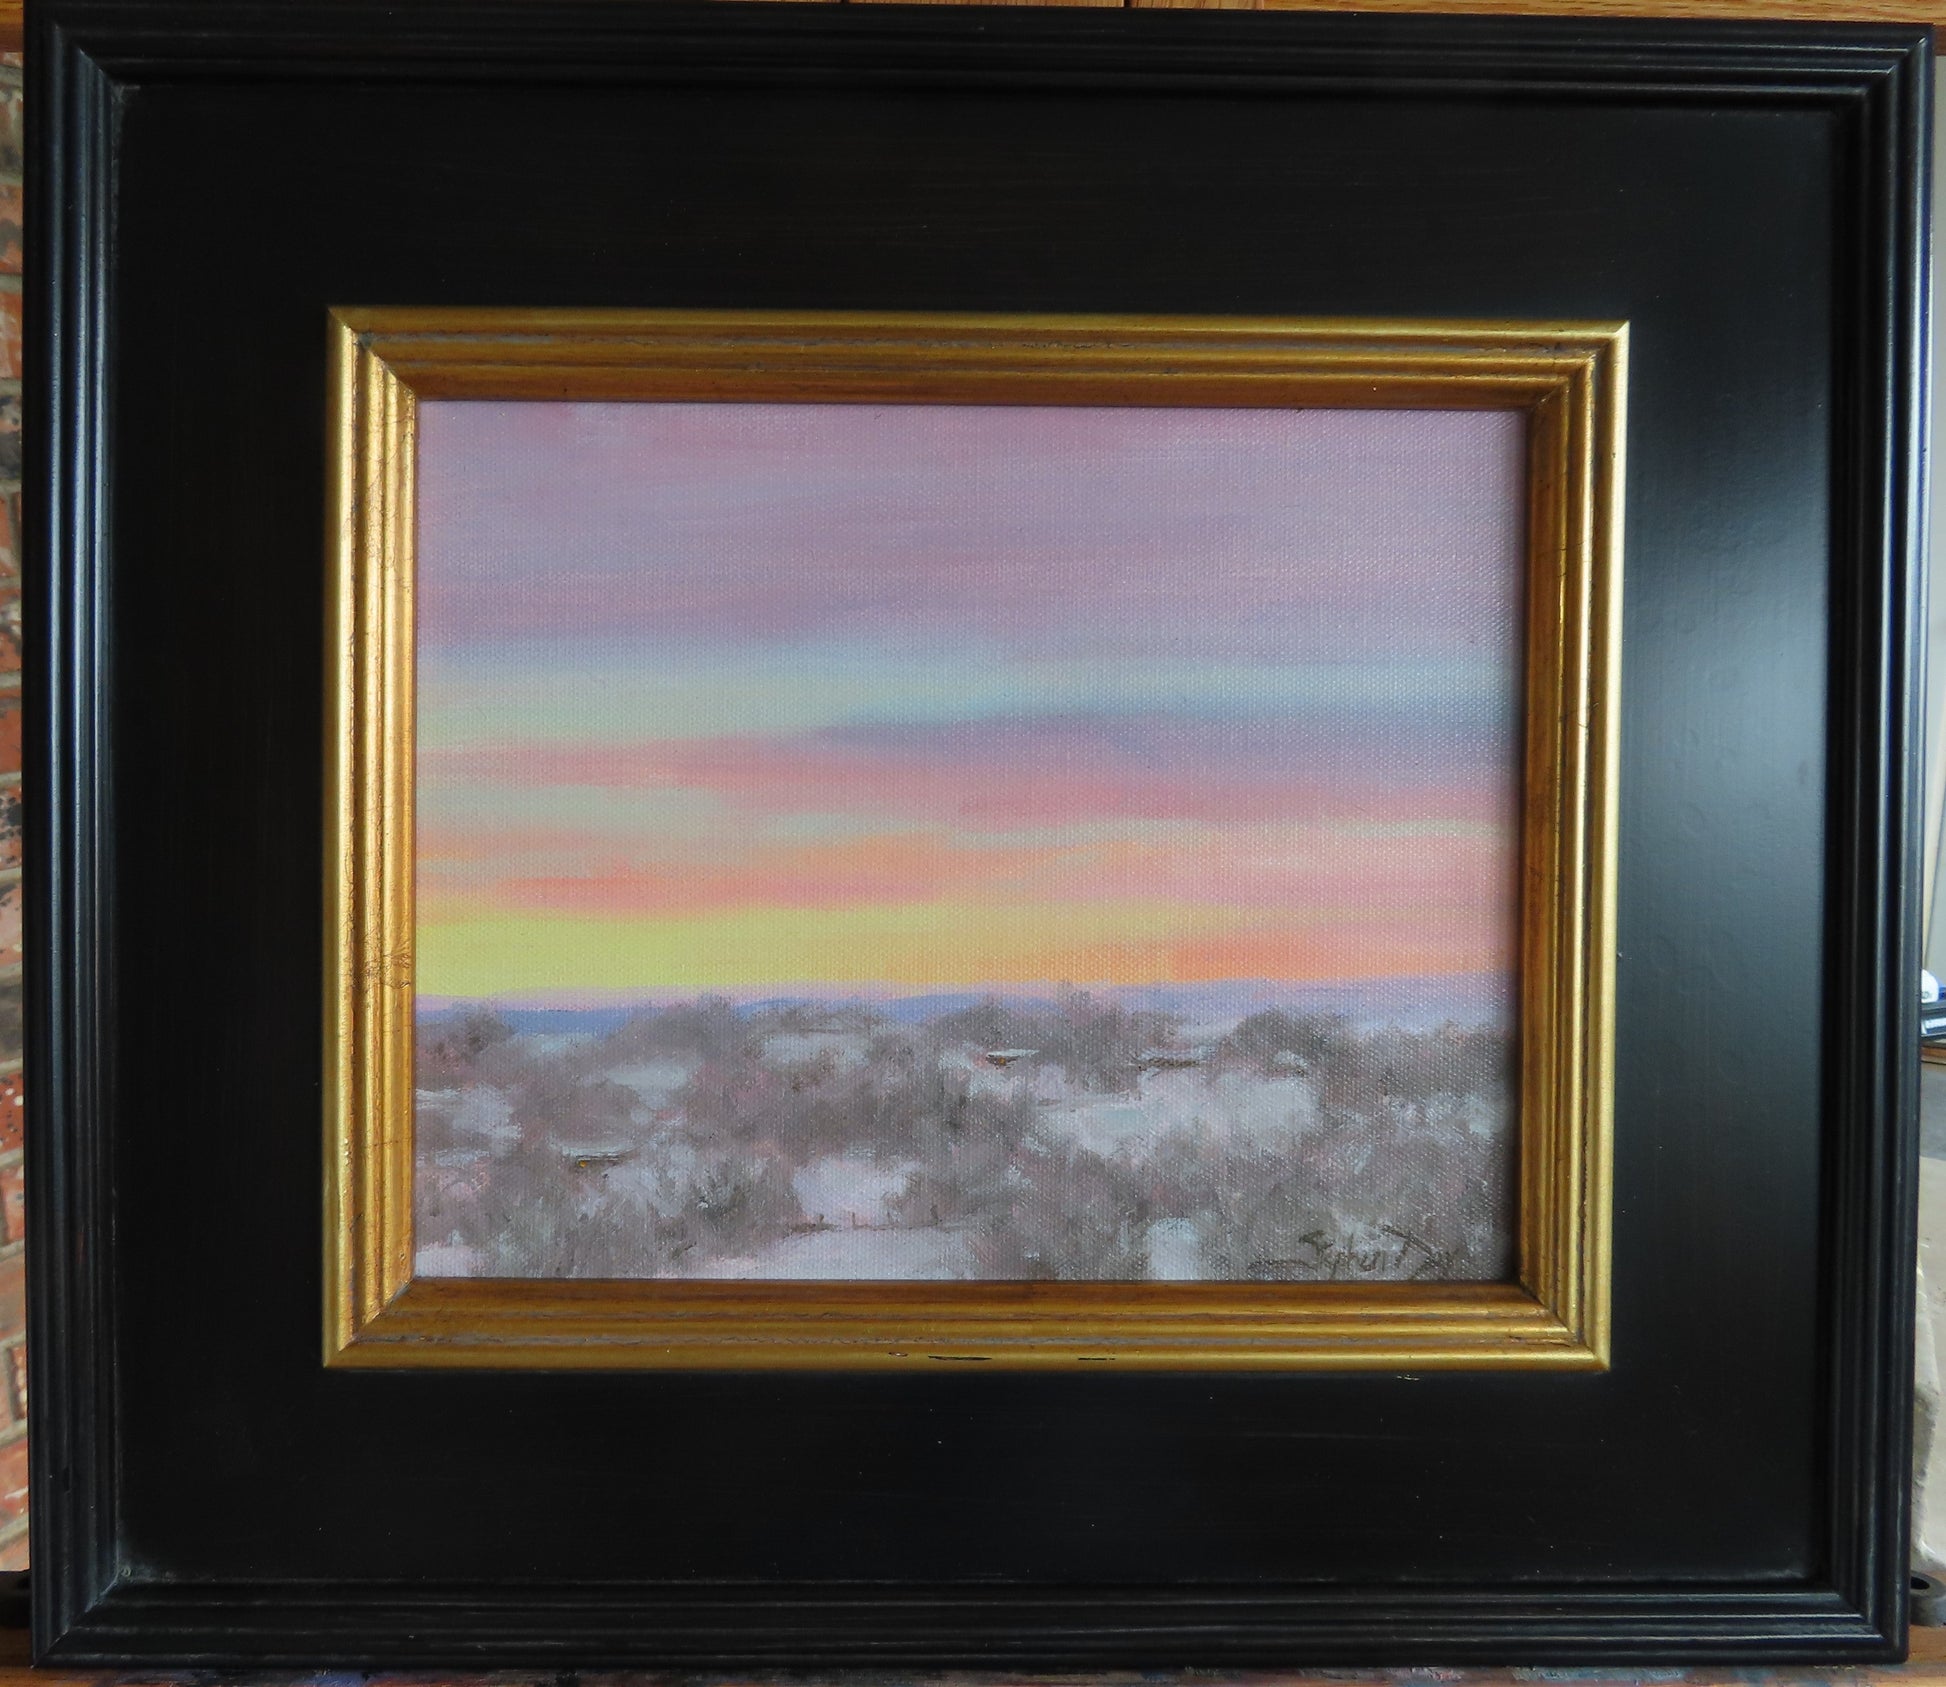 Winter Evening-painting-Stephen Day-Sorrel Sky Gallery